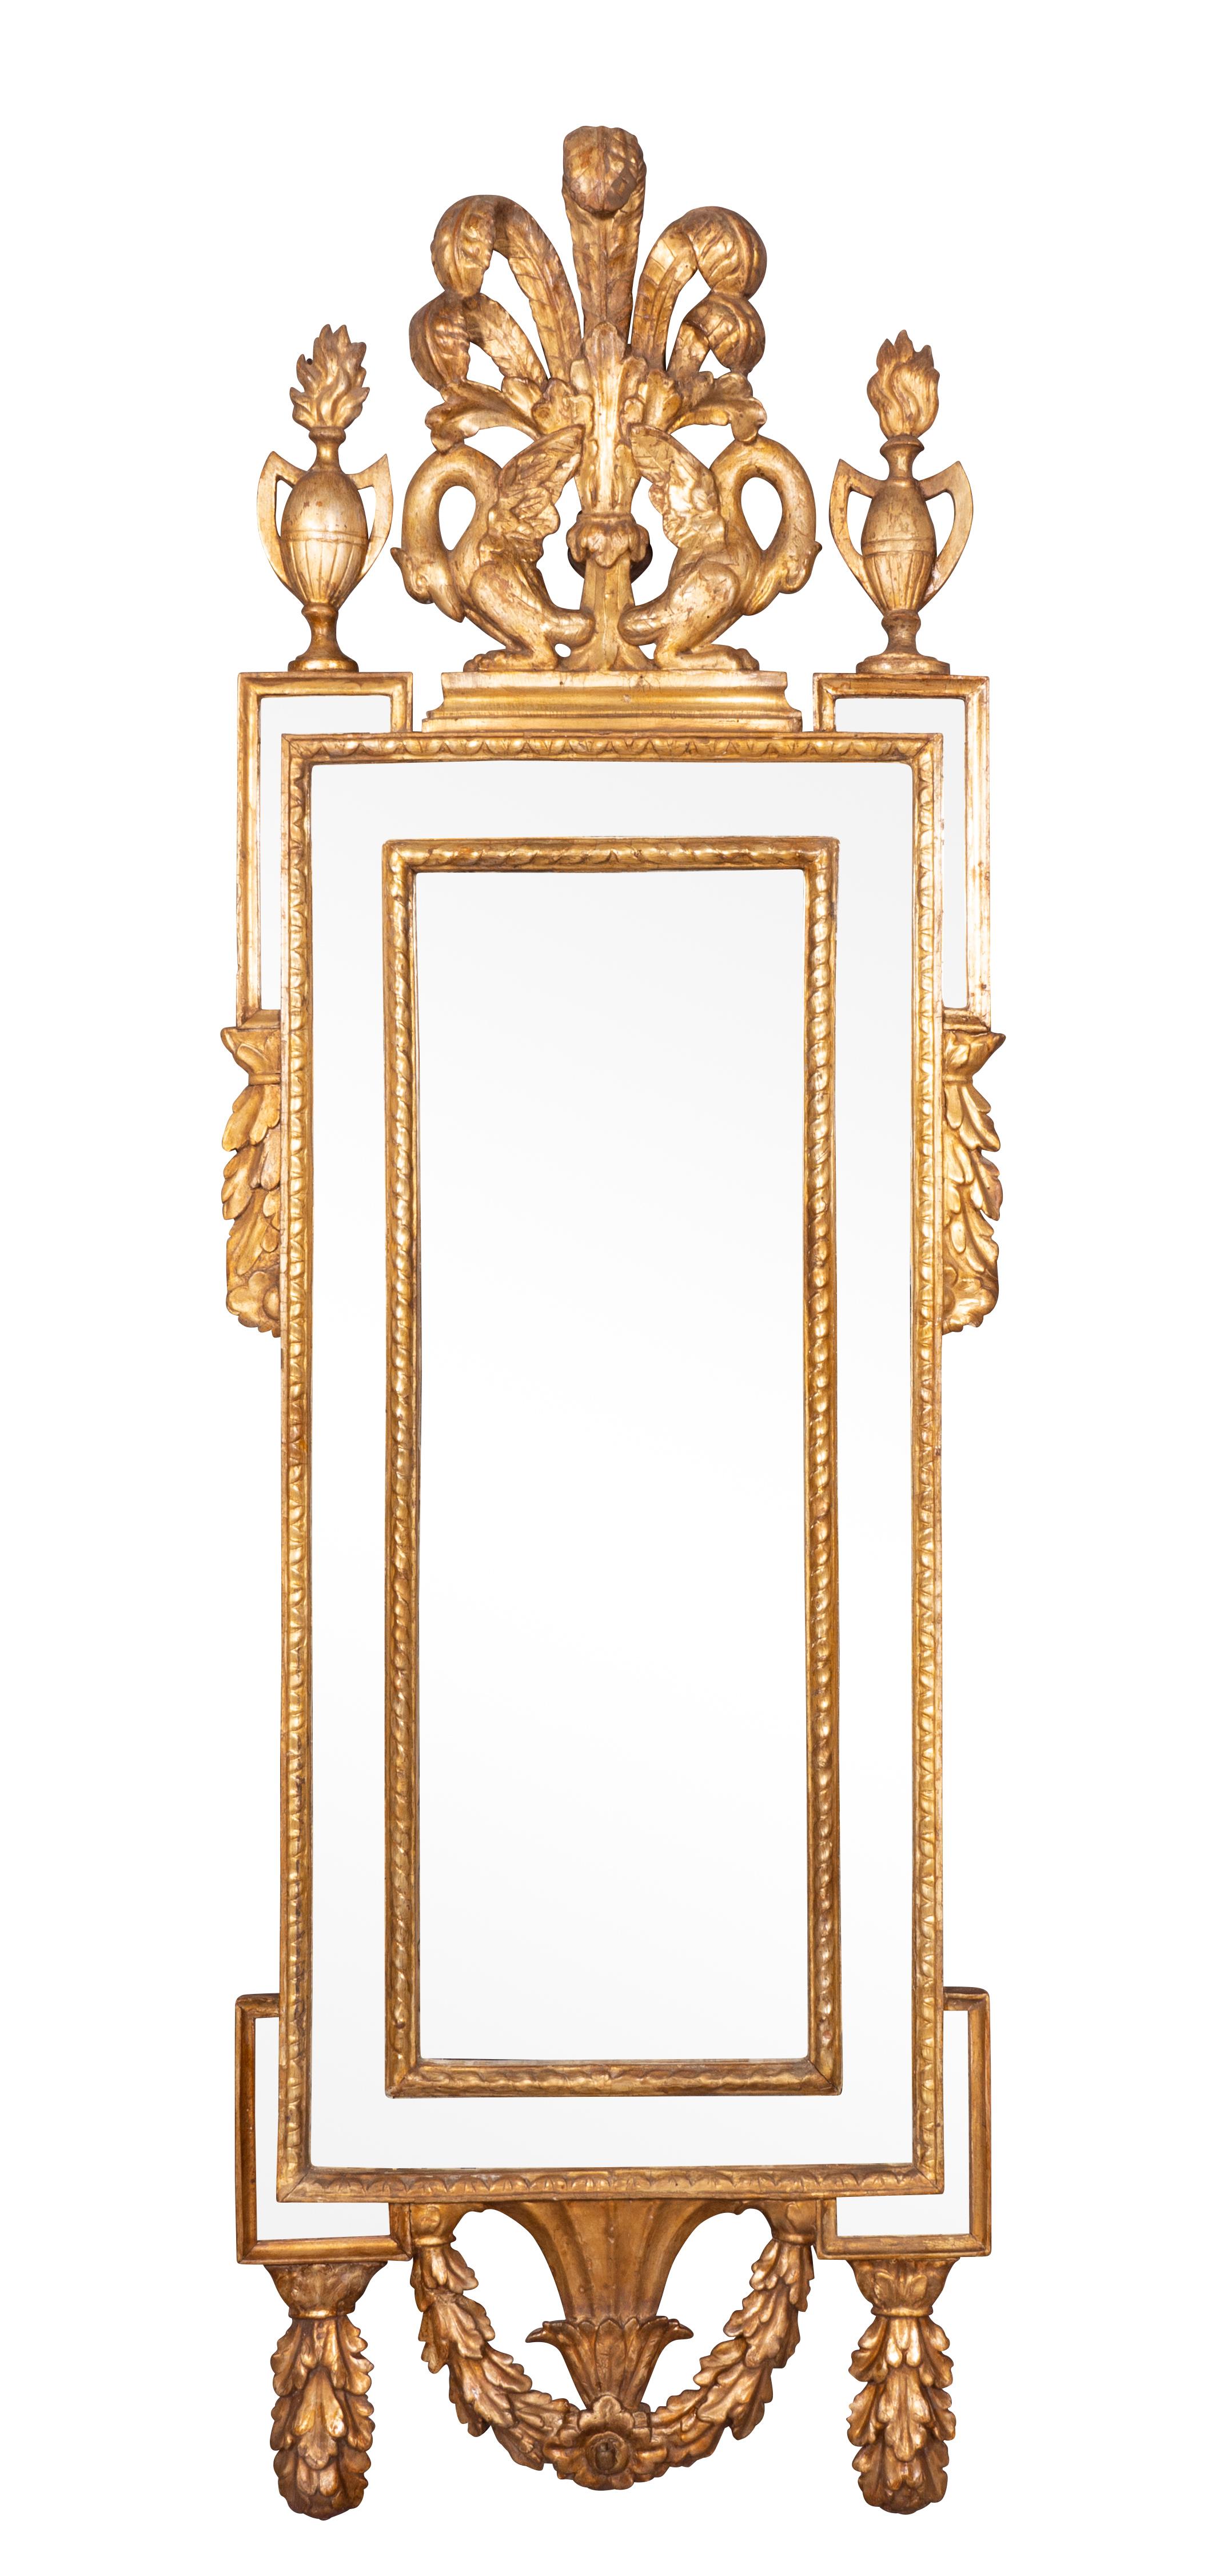 Pair of Italian Neoclassical Giltwood Mirrors In Good Condition For Sale In Essex, MA